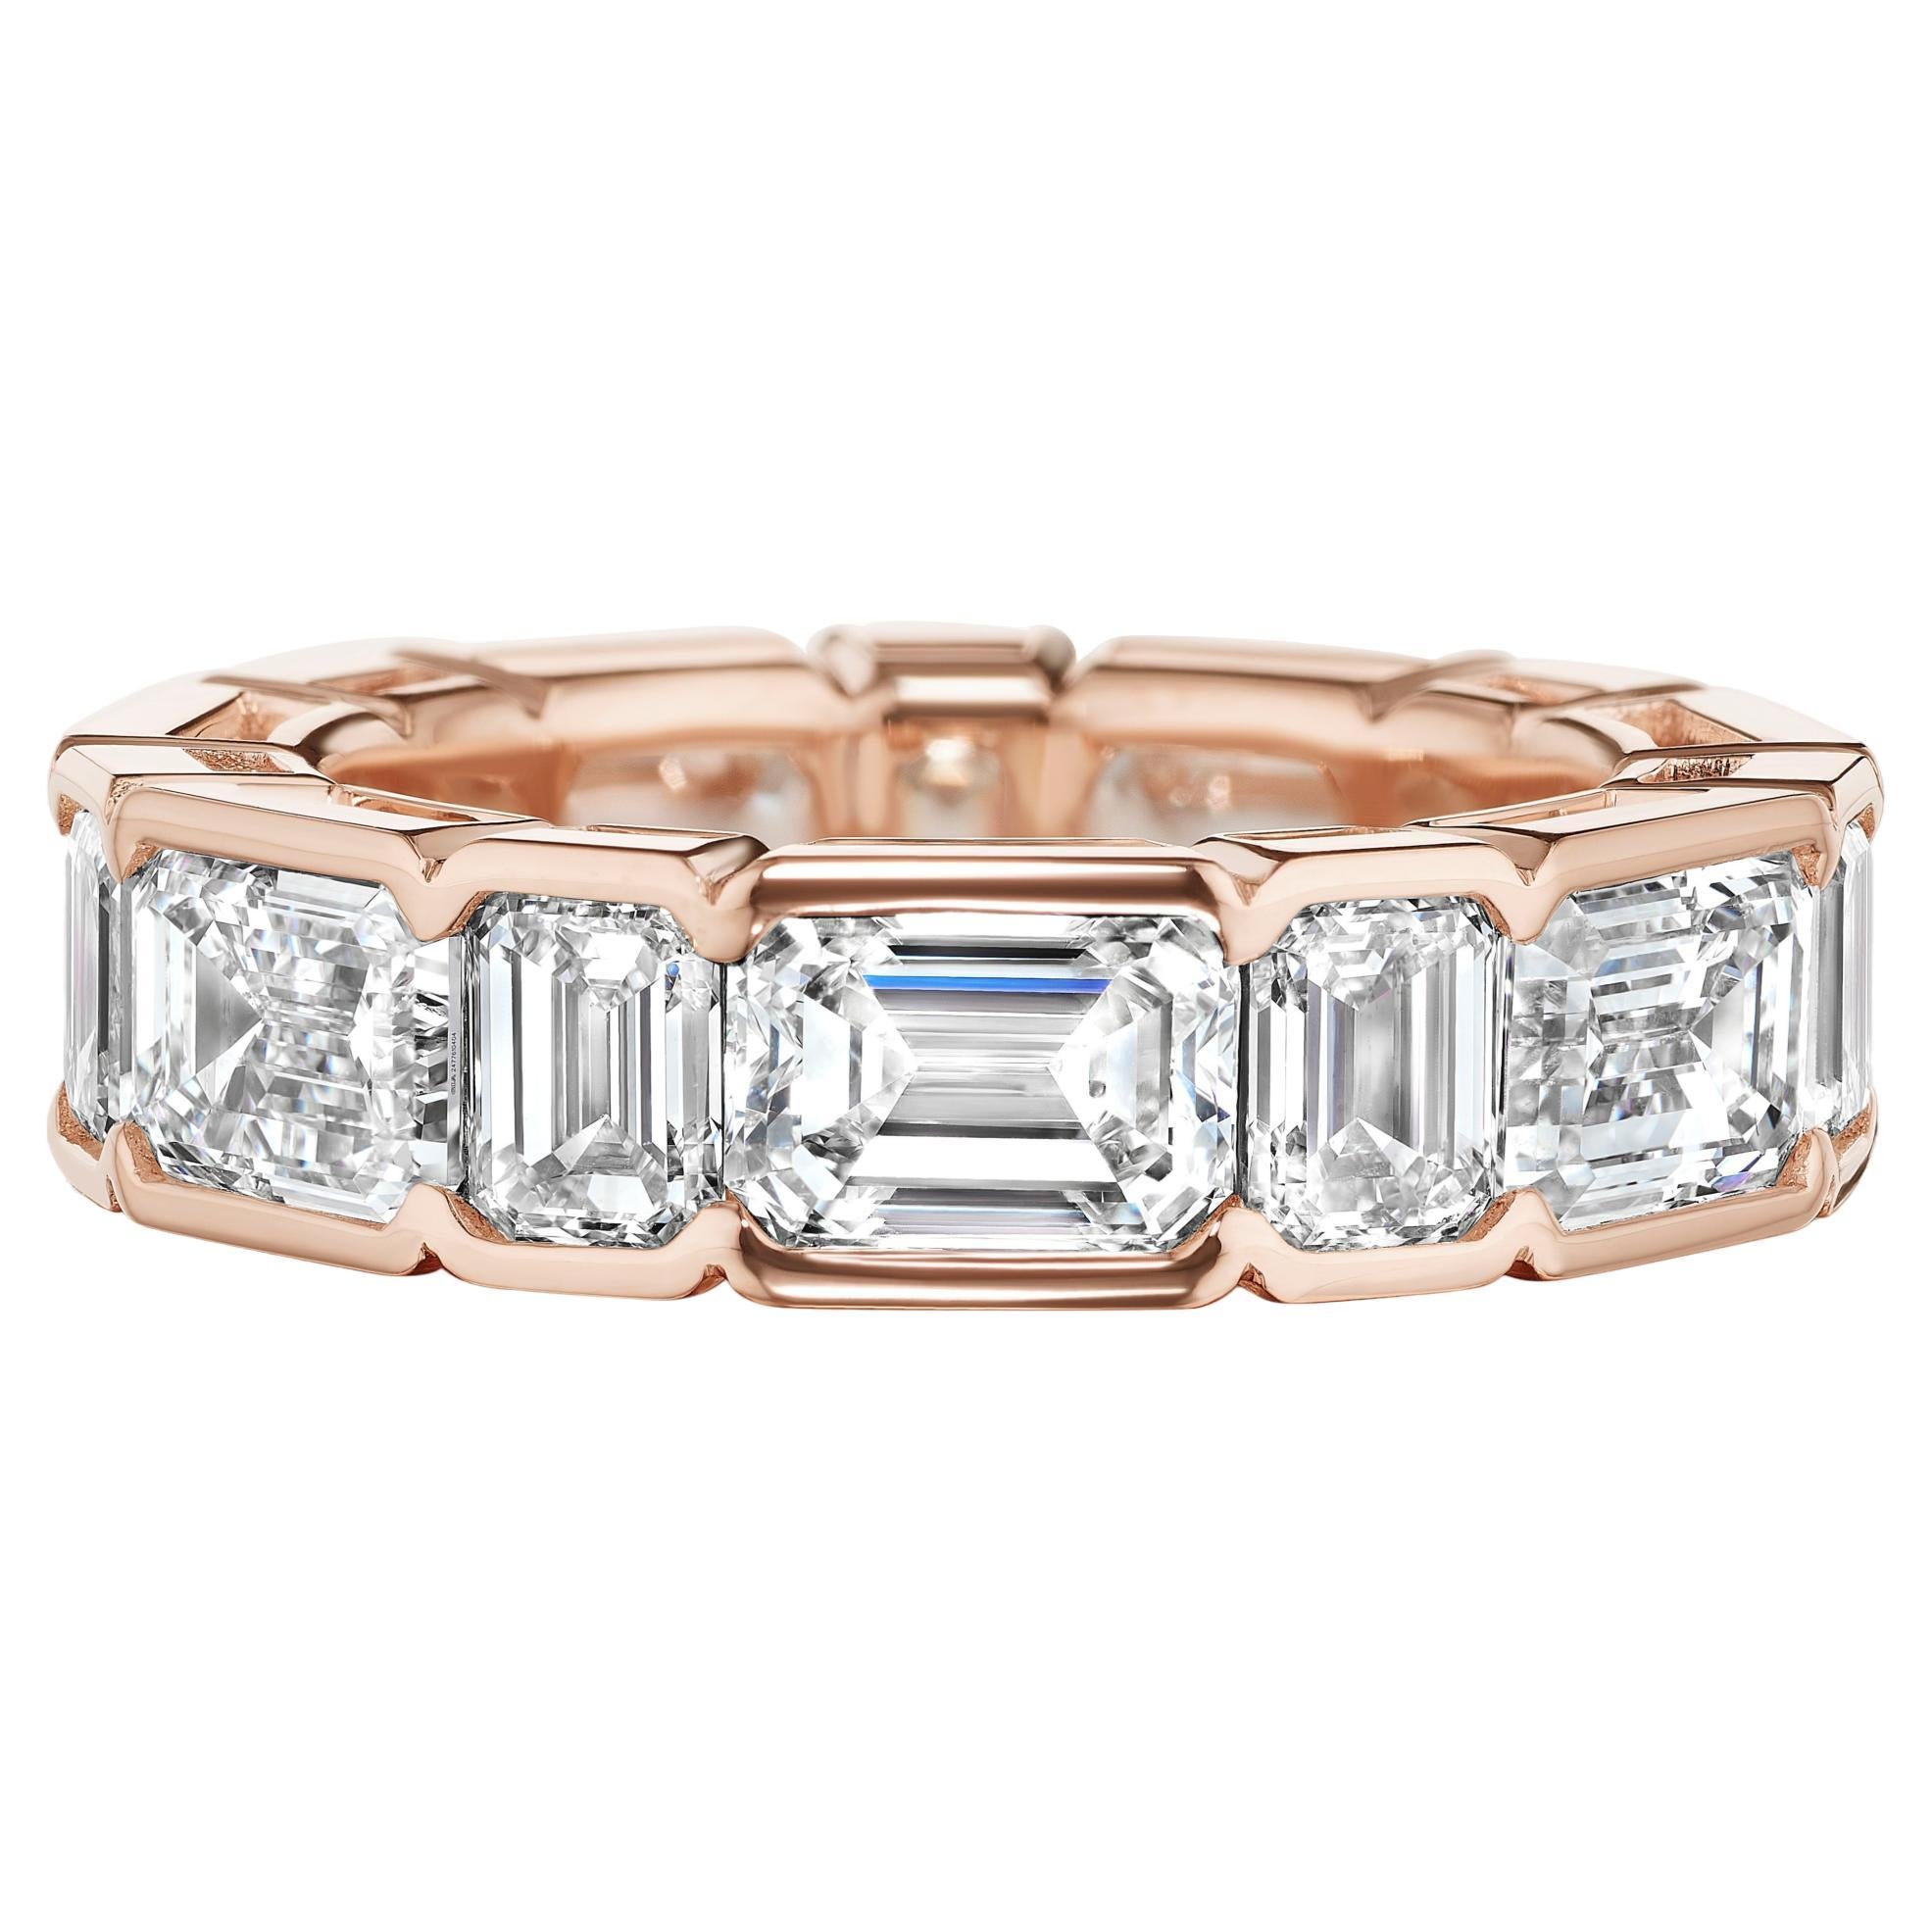 GIA Certified 9.20 Carat Emerald Cut Rose Gold Eternity Band Ring